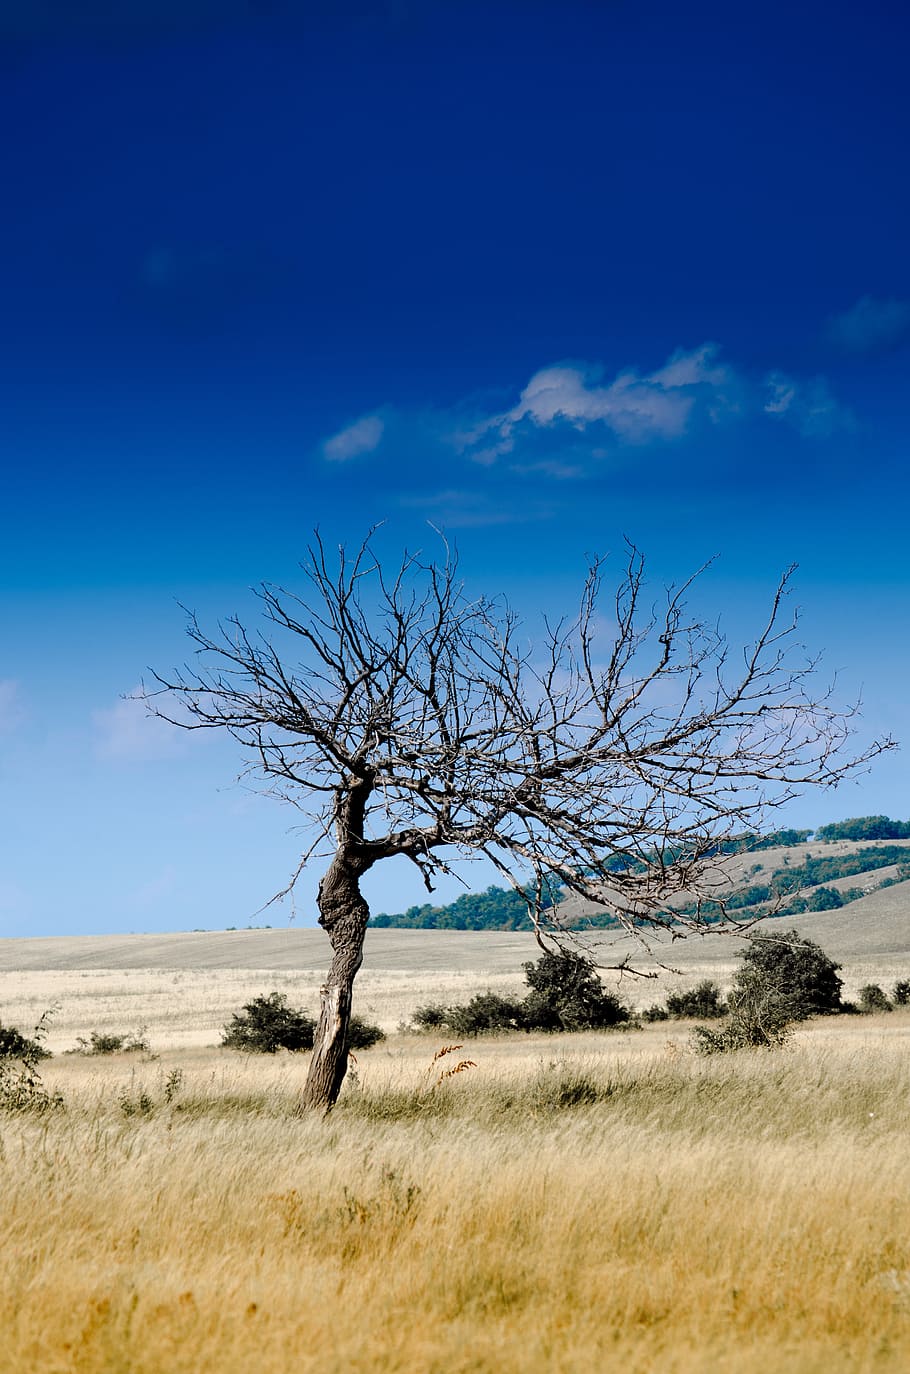 leafless tree, grass field, wood, nature, sheer, drought, dead tree, decay, dry wood, sky